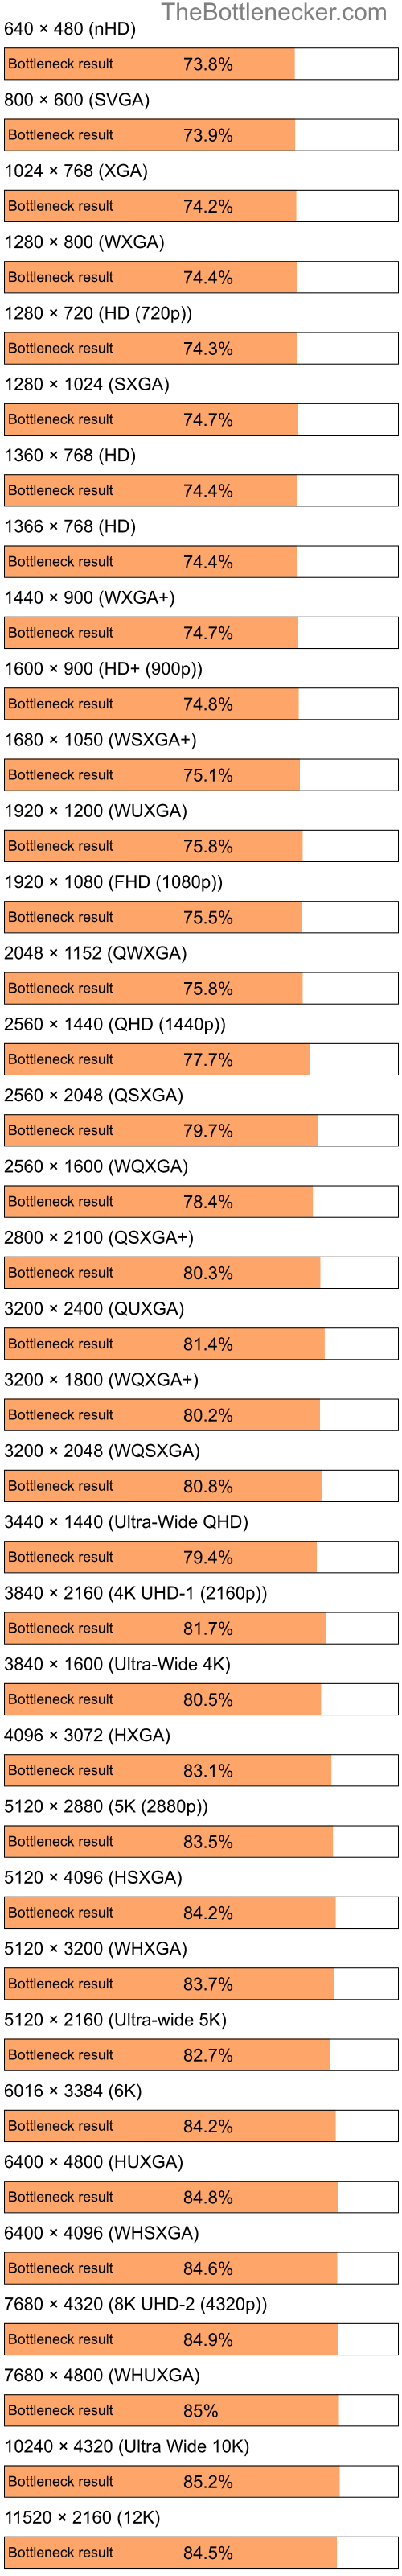 Bottleneck results by resolution for Intel Atom Z520 and AMD Mobility Radeon X2300 in7 Days to Die